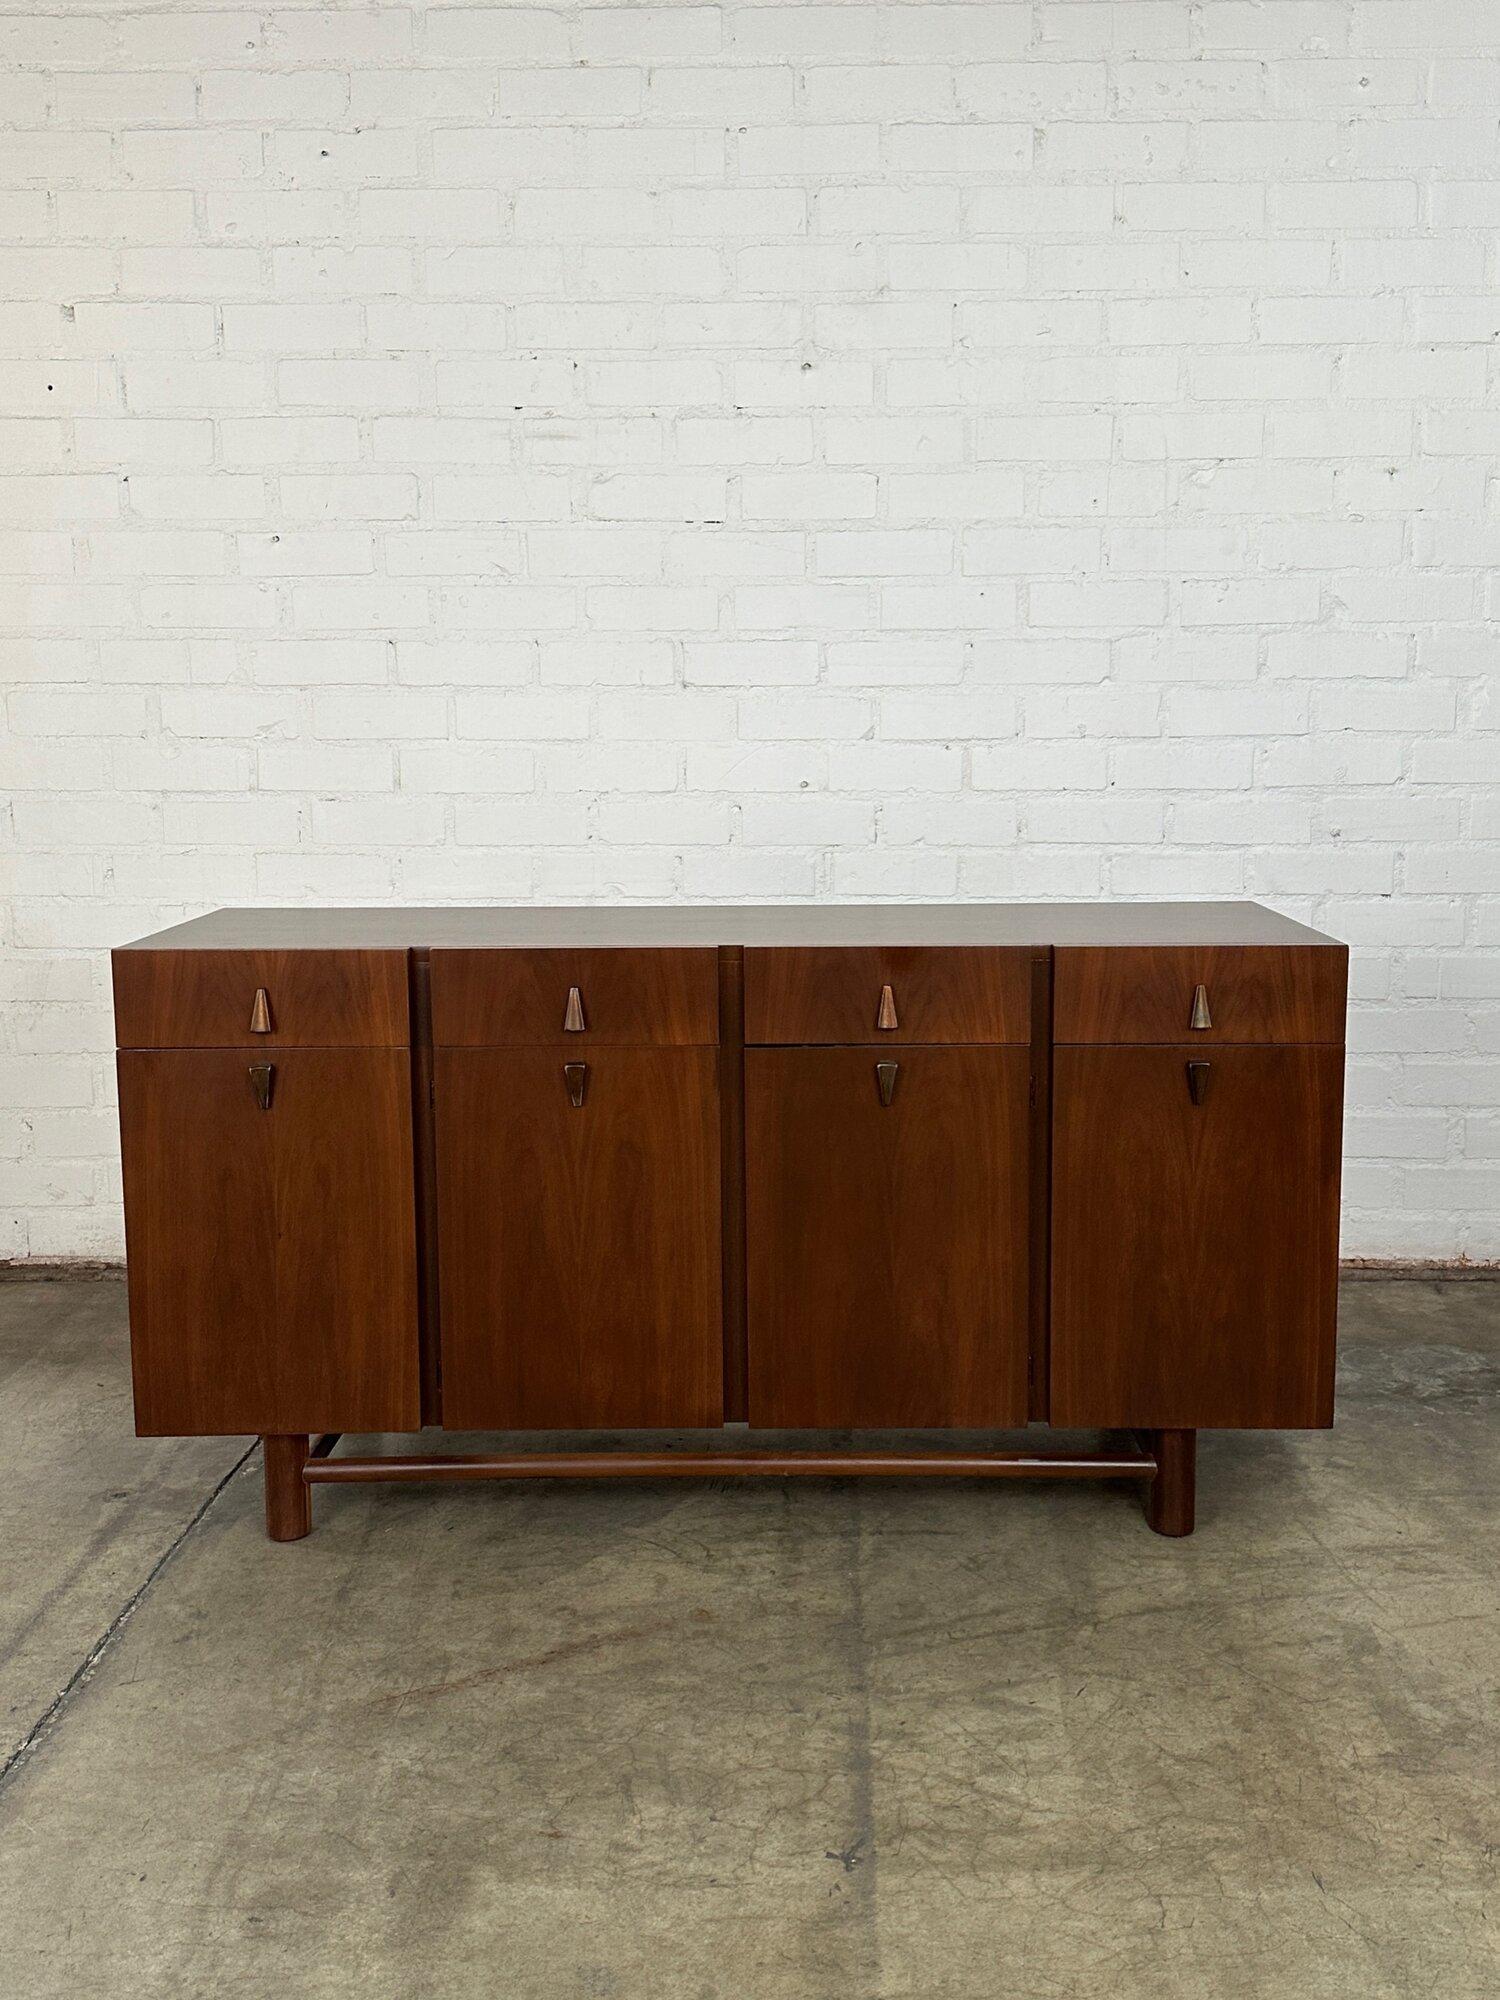 W61.75 D19.5 H32

Rare Walnut sideboard in fully restored condition. Item is structurally sound, fully functional, and offers a nice dark deep walnut finish. Item has original manufacture stamp and offers both open and closed storage.

We offer full